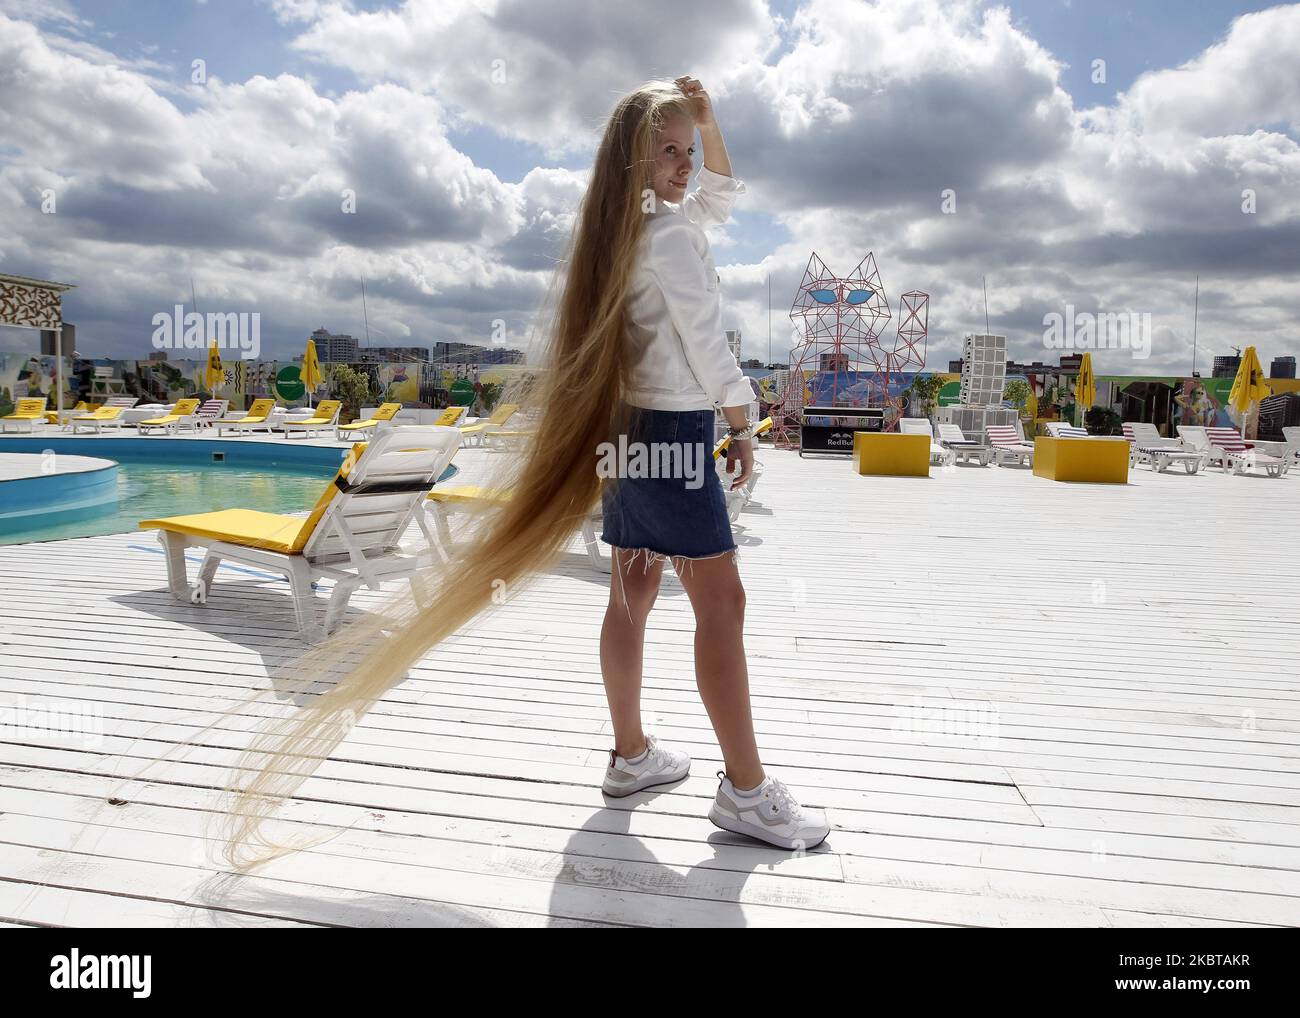 Ukrainian Olena Korzenyuk, 17, shows her hair wich is 2.35 meters long, at the National Registry of Records of Ukraine presentation in Kyiv, Ukraine, on 09 July, 2020. Olena Korzenyuk is considered the record holder with the longest hair among teenagers in Ukraine. (Photo by STR/NurPhoto) Stock Photo